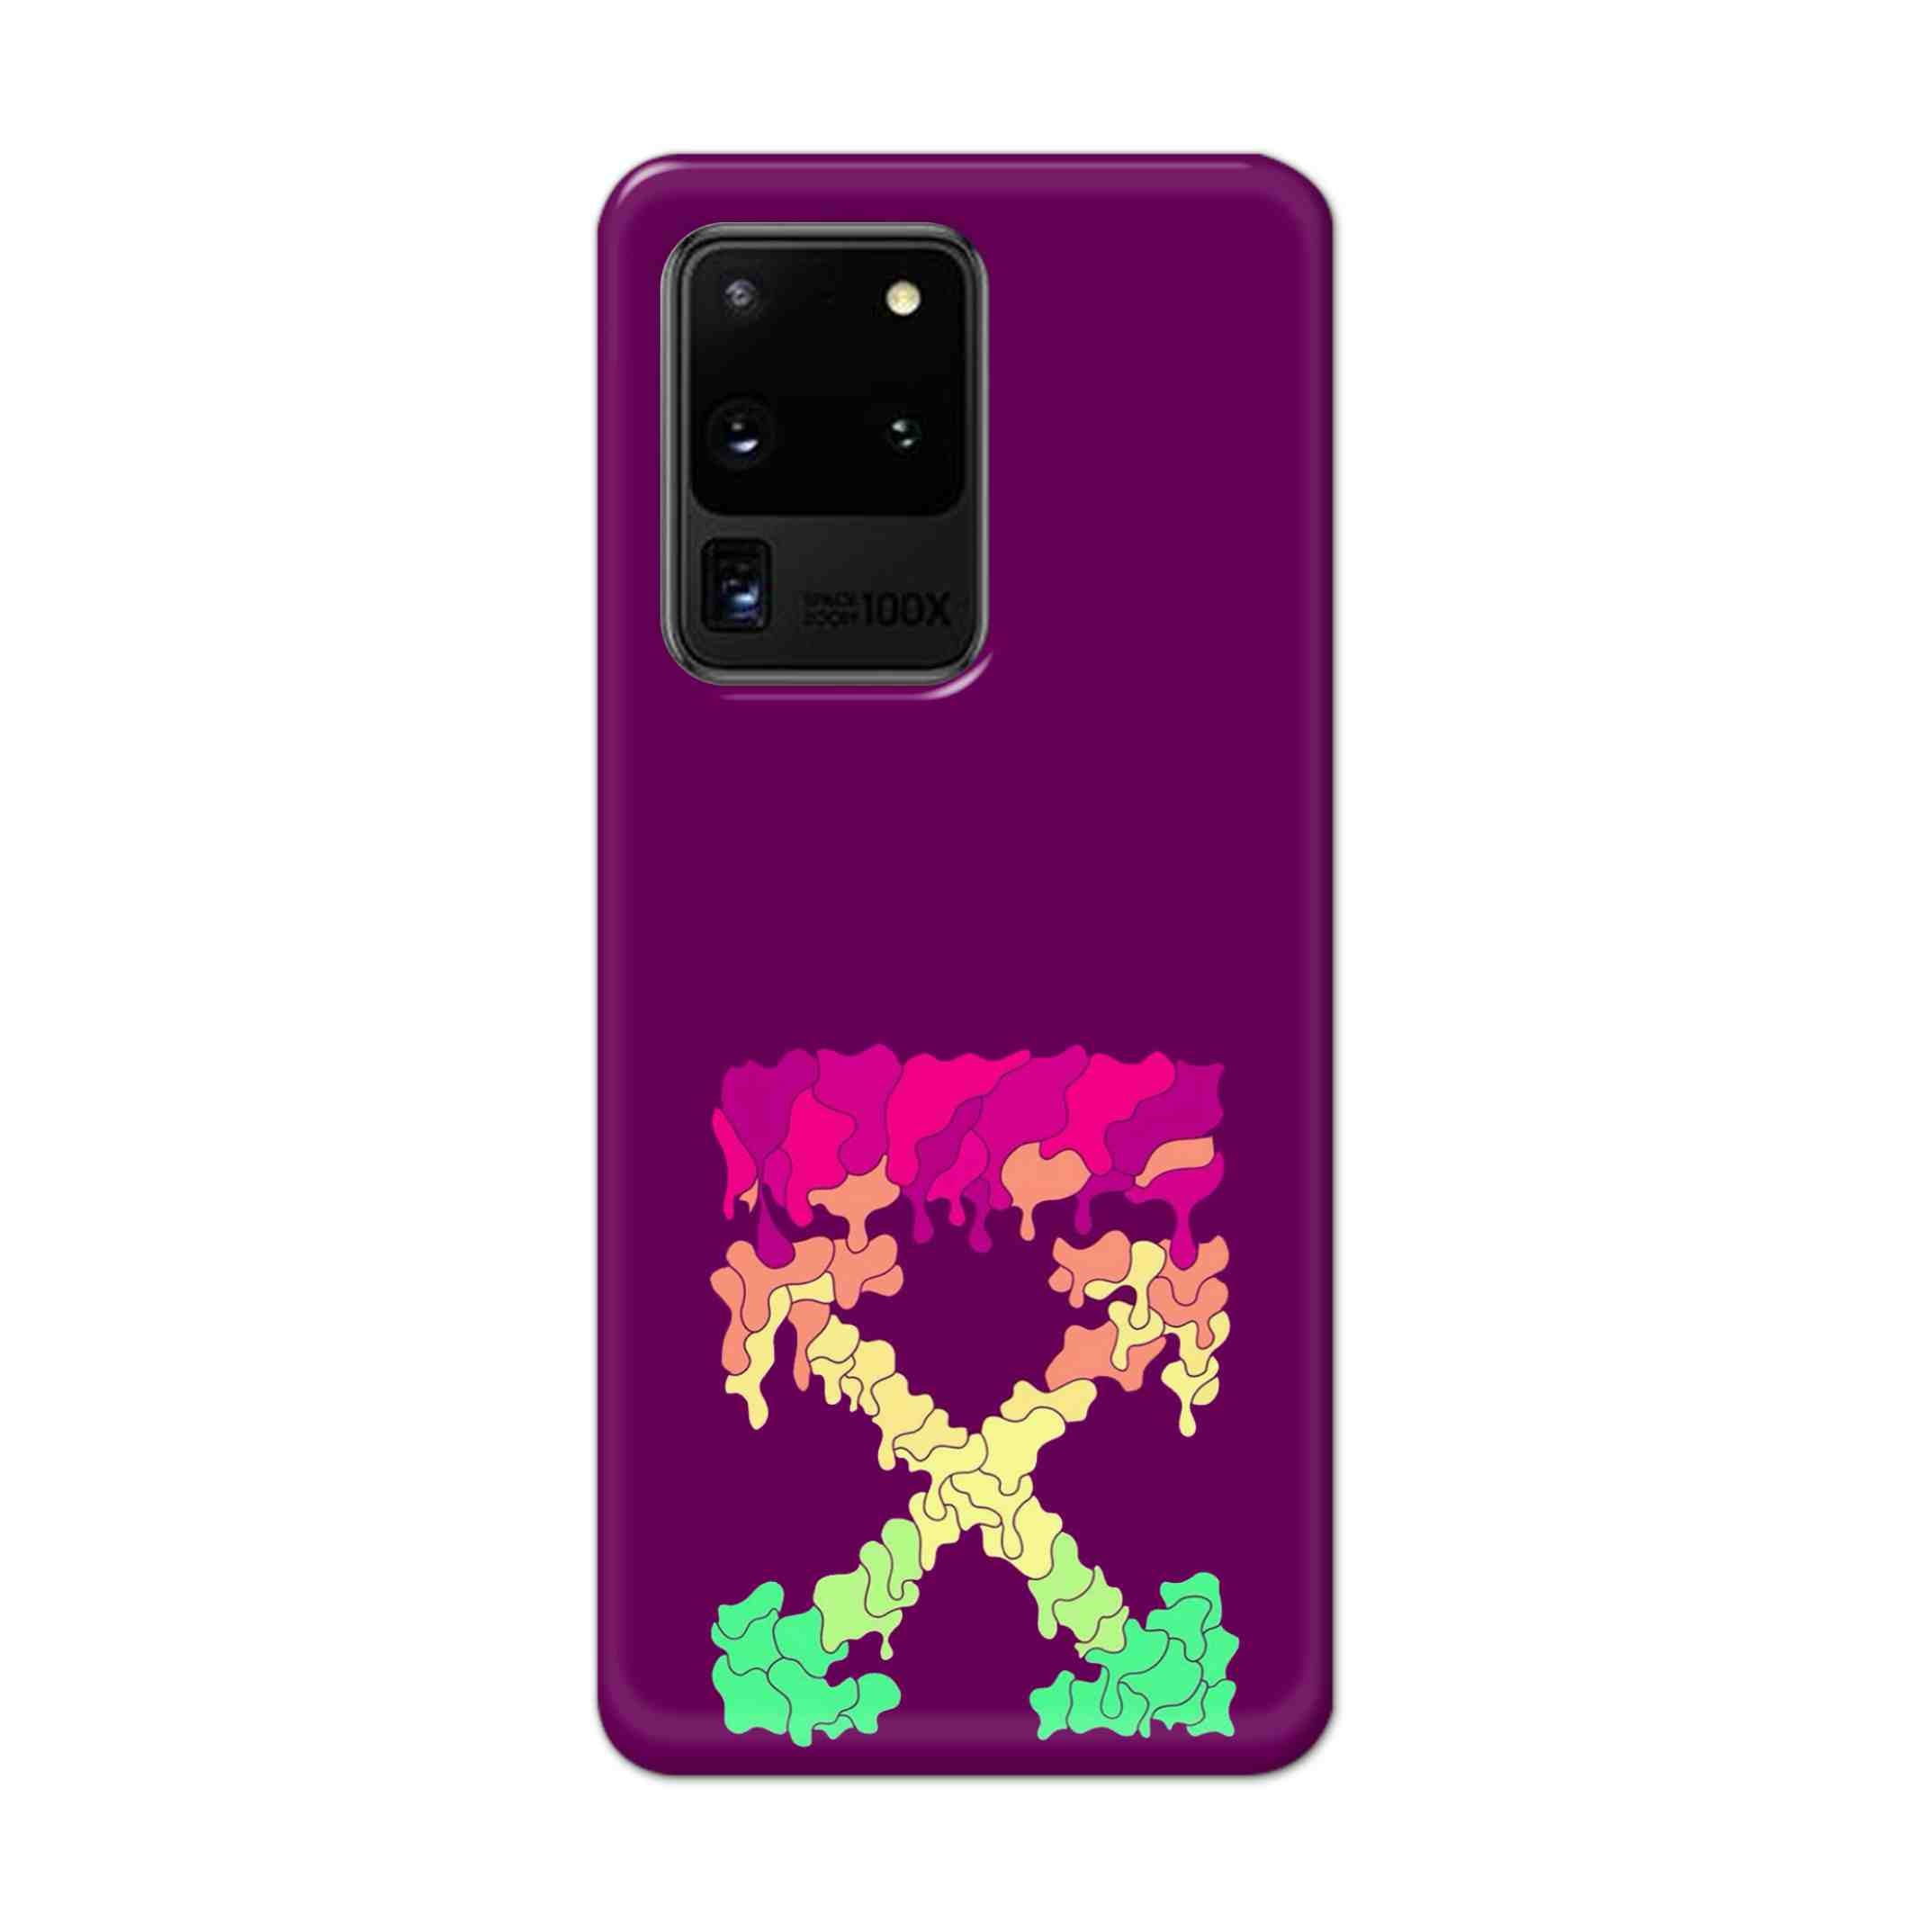 Buy X.O Hard Back Mobile Phone Case Cover For Samsung Galaxy S20 Ultra Online